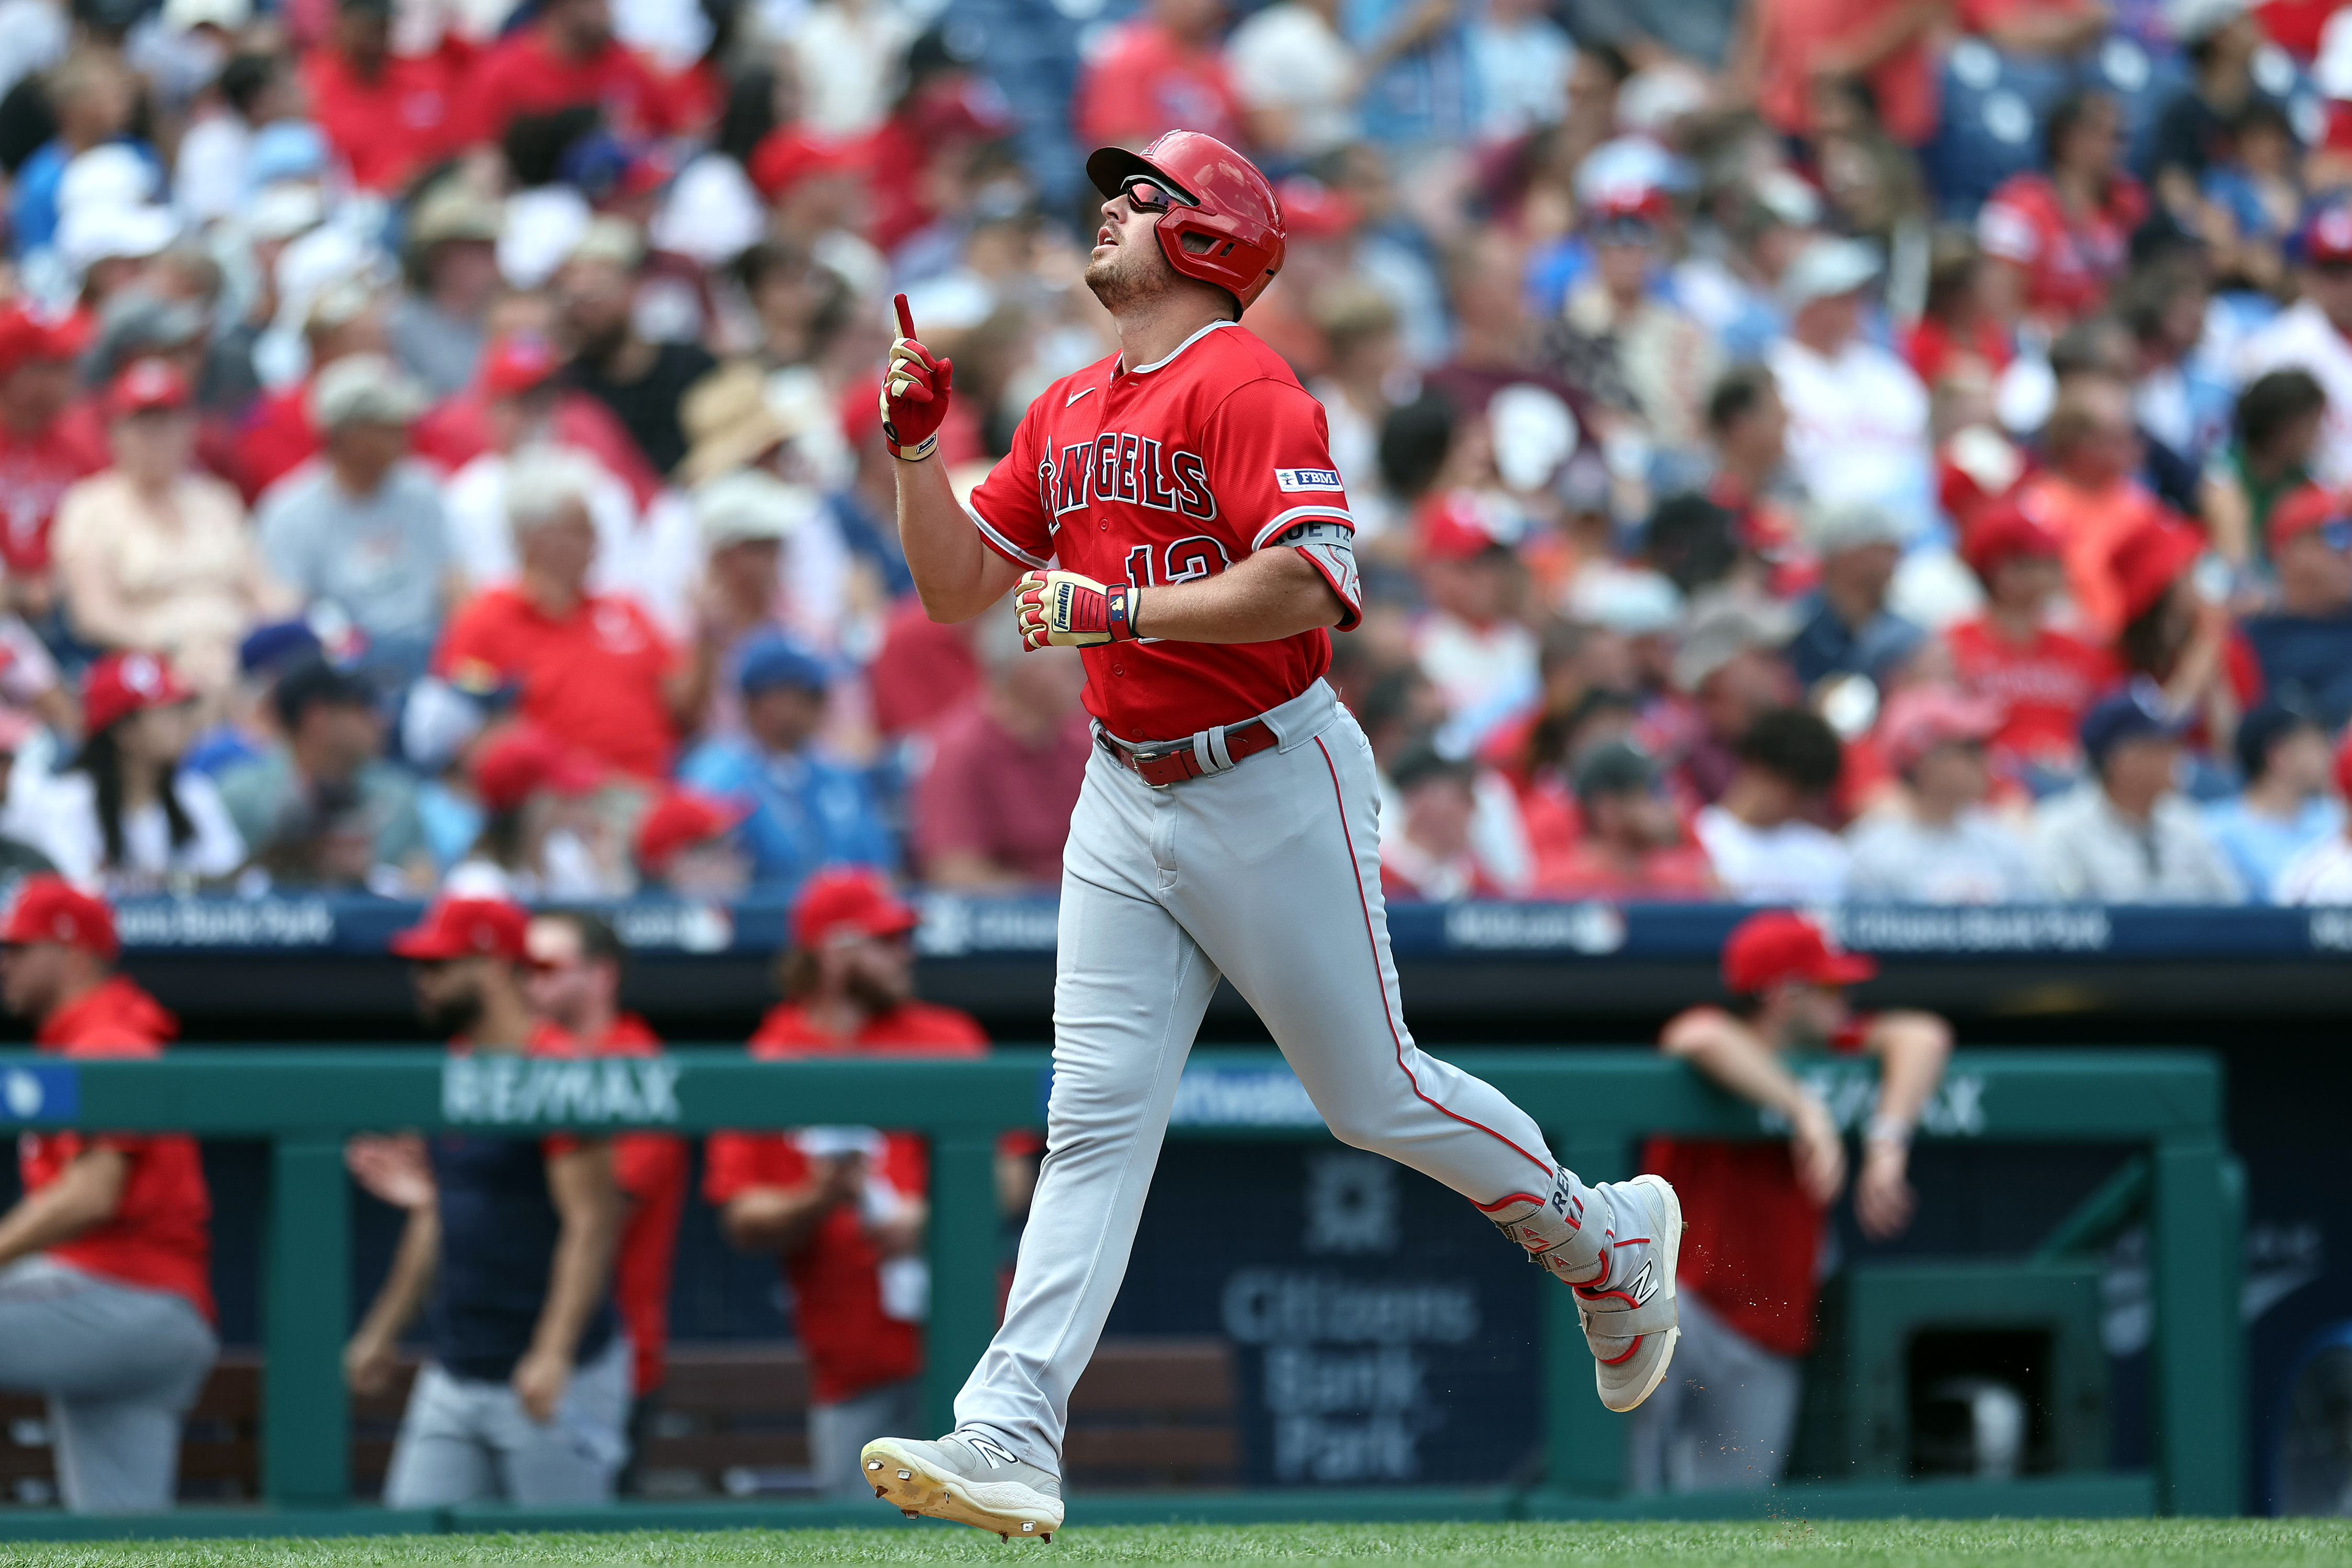 What Hunter Renfroe and Harrison Bader bring to the Reds' lineup